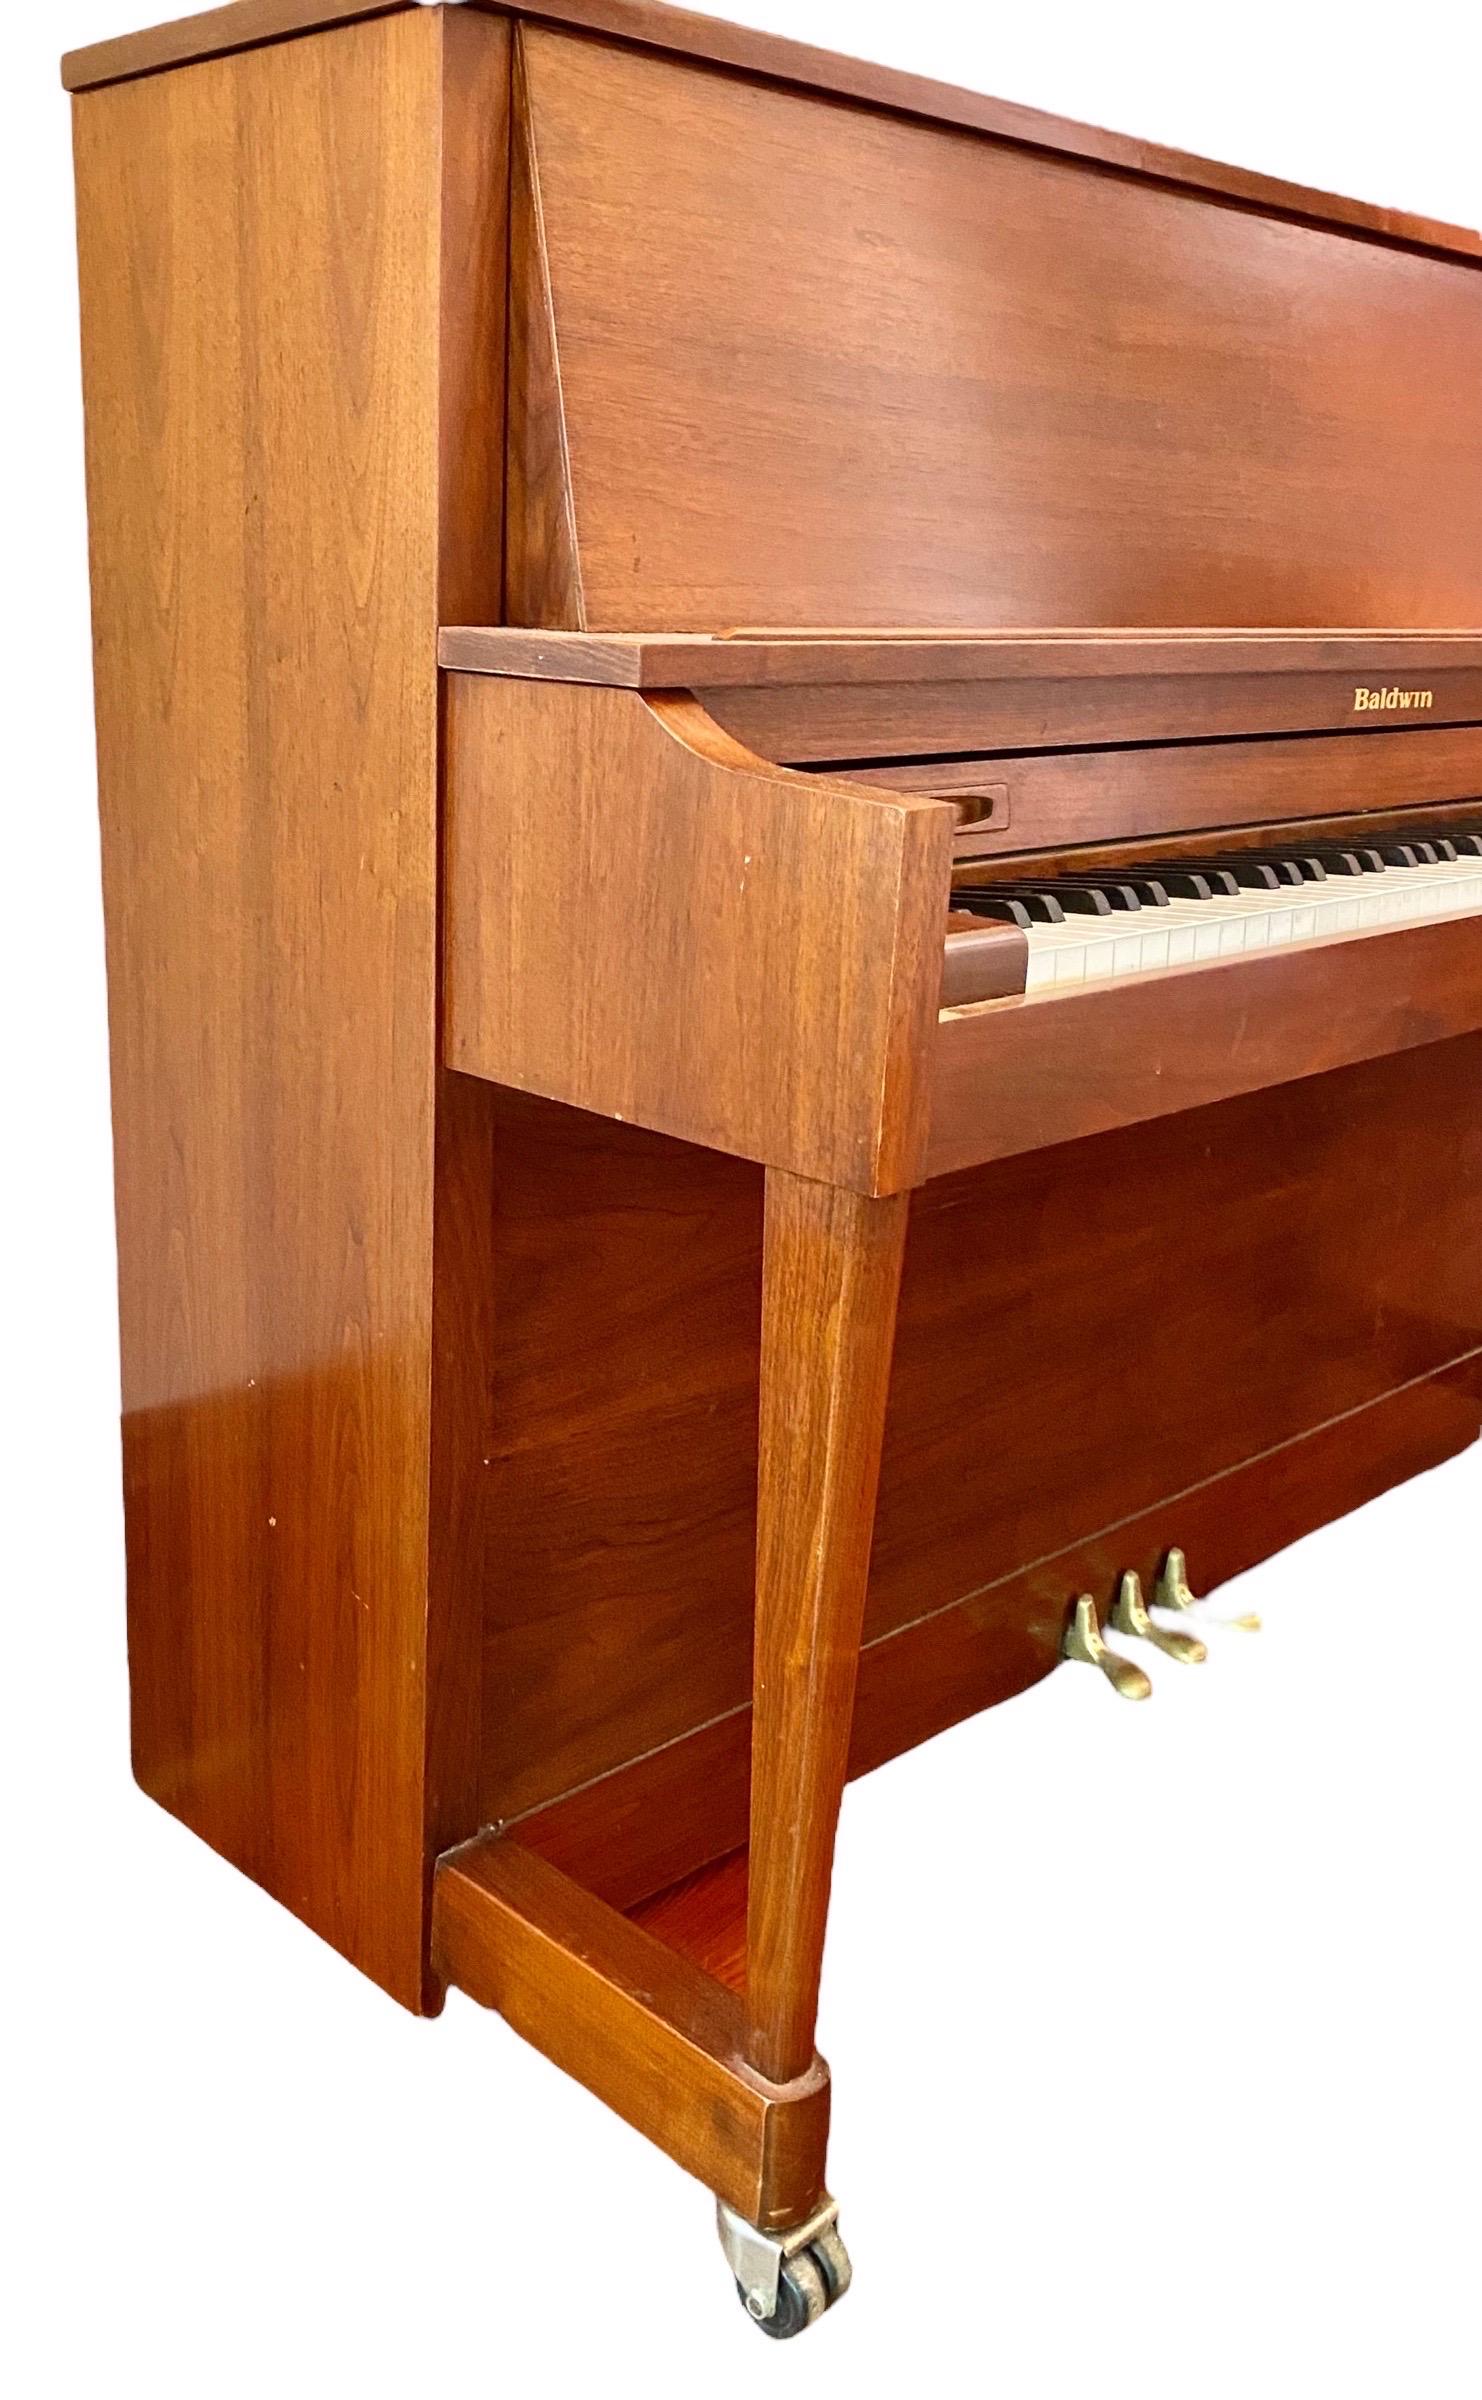 Ivory 2004 Baldwin Upright Piano, 243E Pro Series – Made by Gibson in Nashville, TN